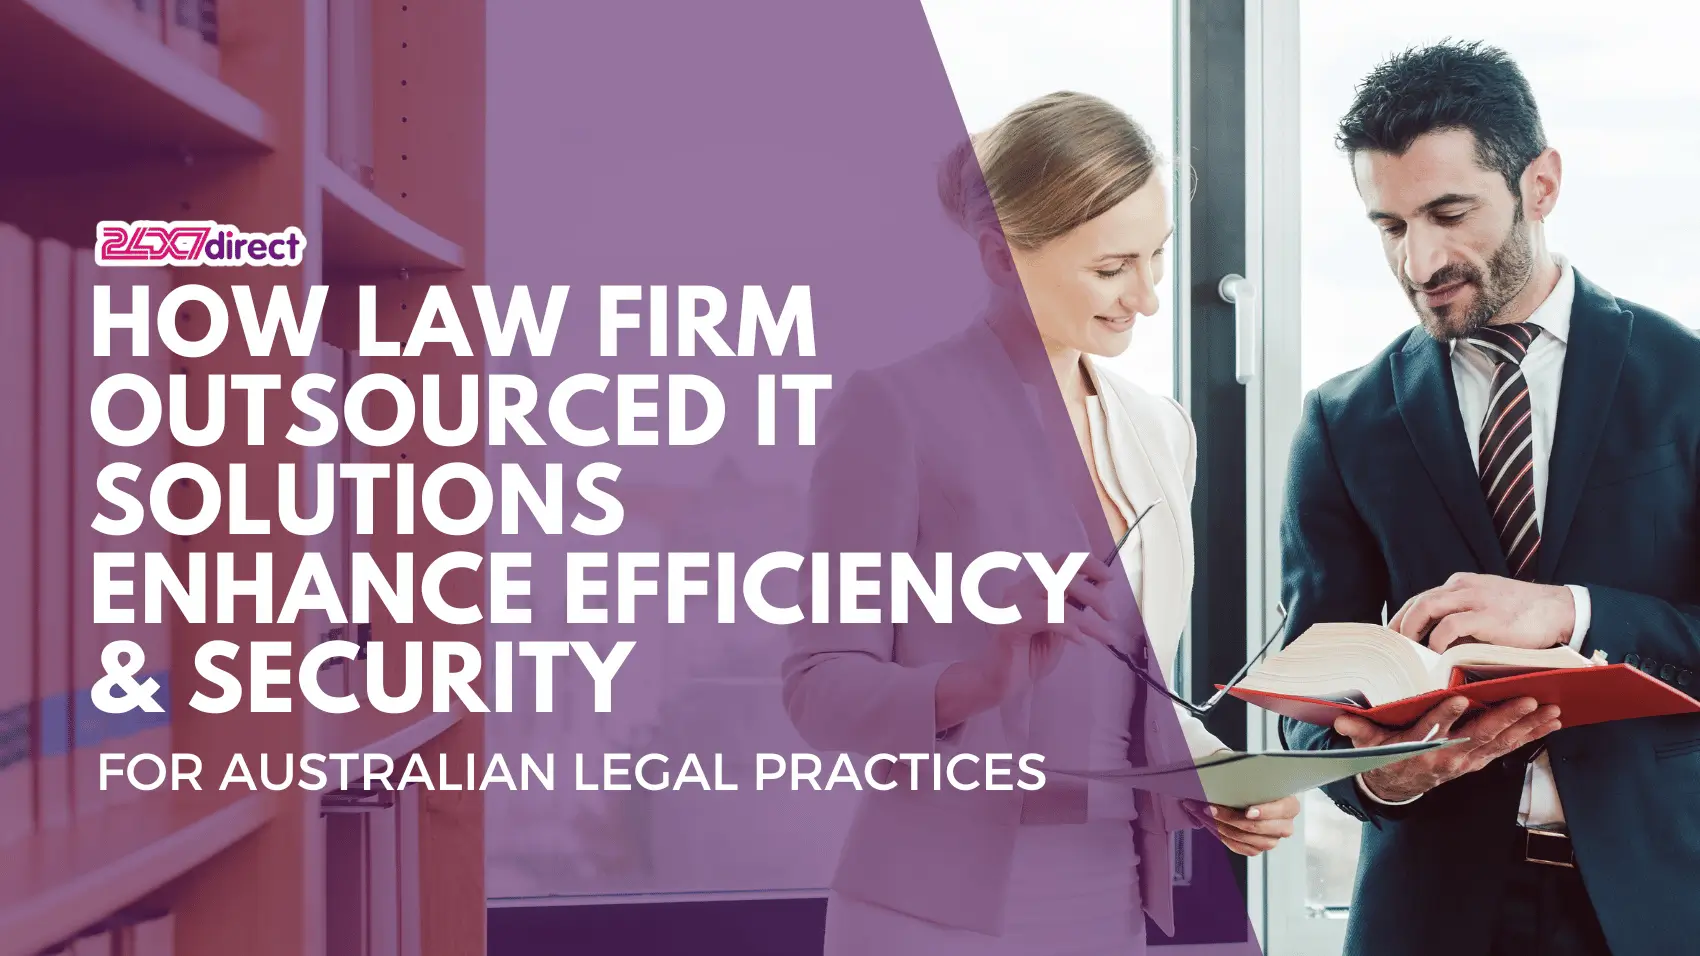 How Law Firm Outsourced IT Solutions Enhance Efficiency and Security for Australian Legal Practices